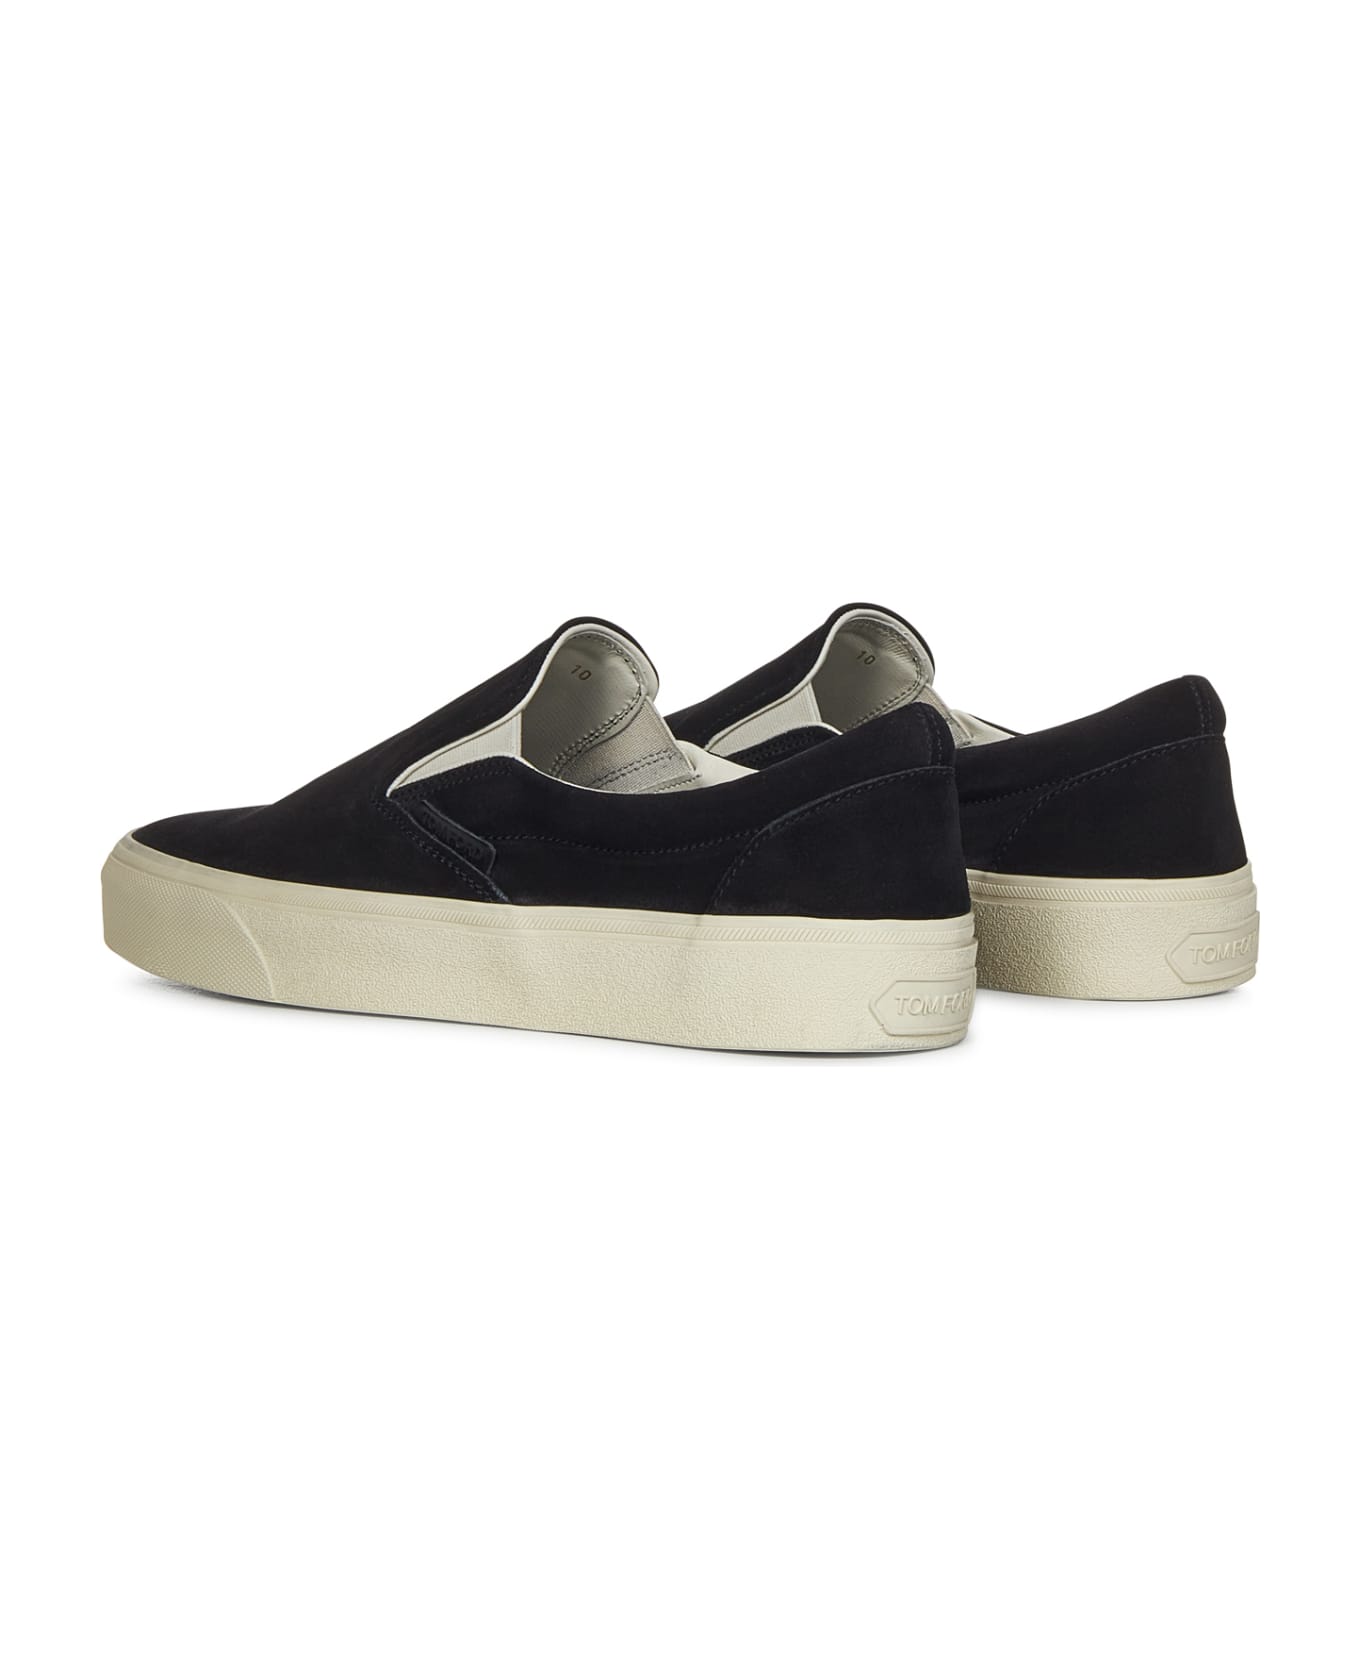 Tom Ford Sneakers - BLACK/NEUTRALS